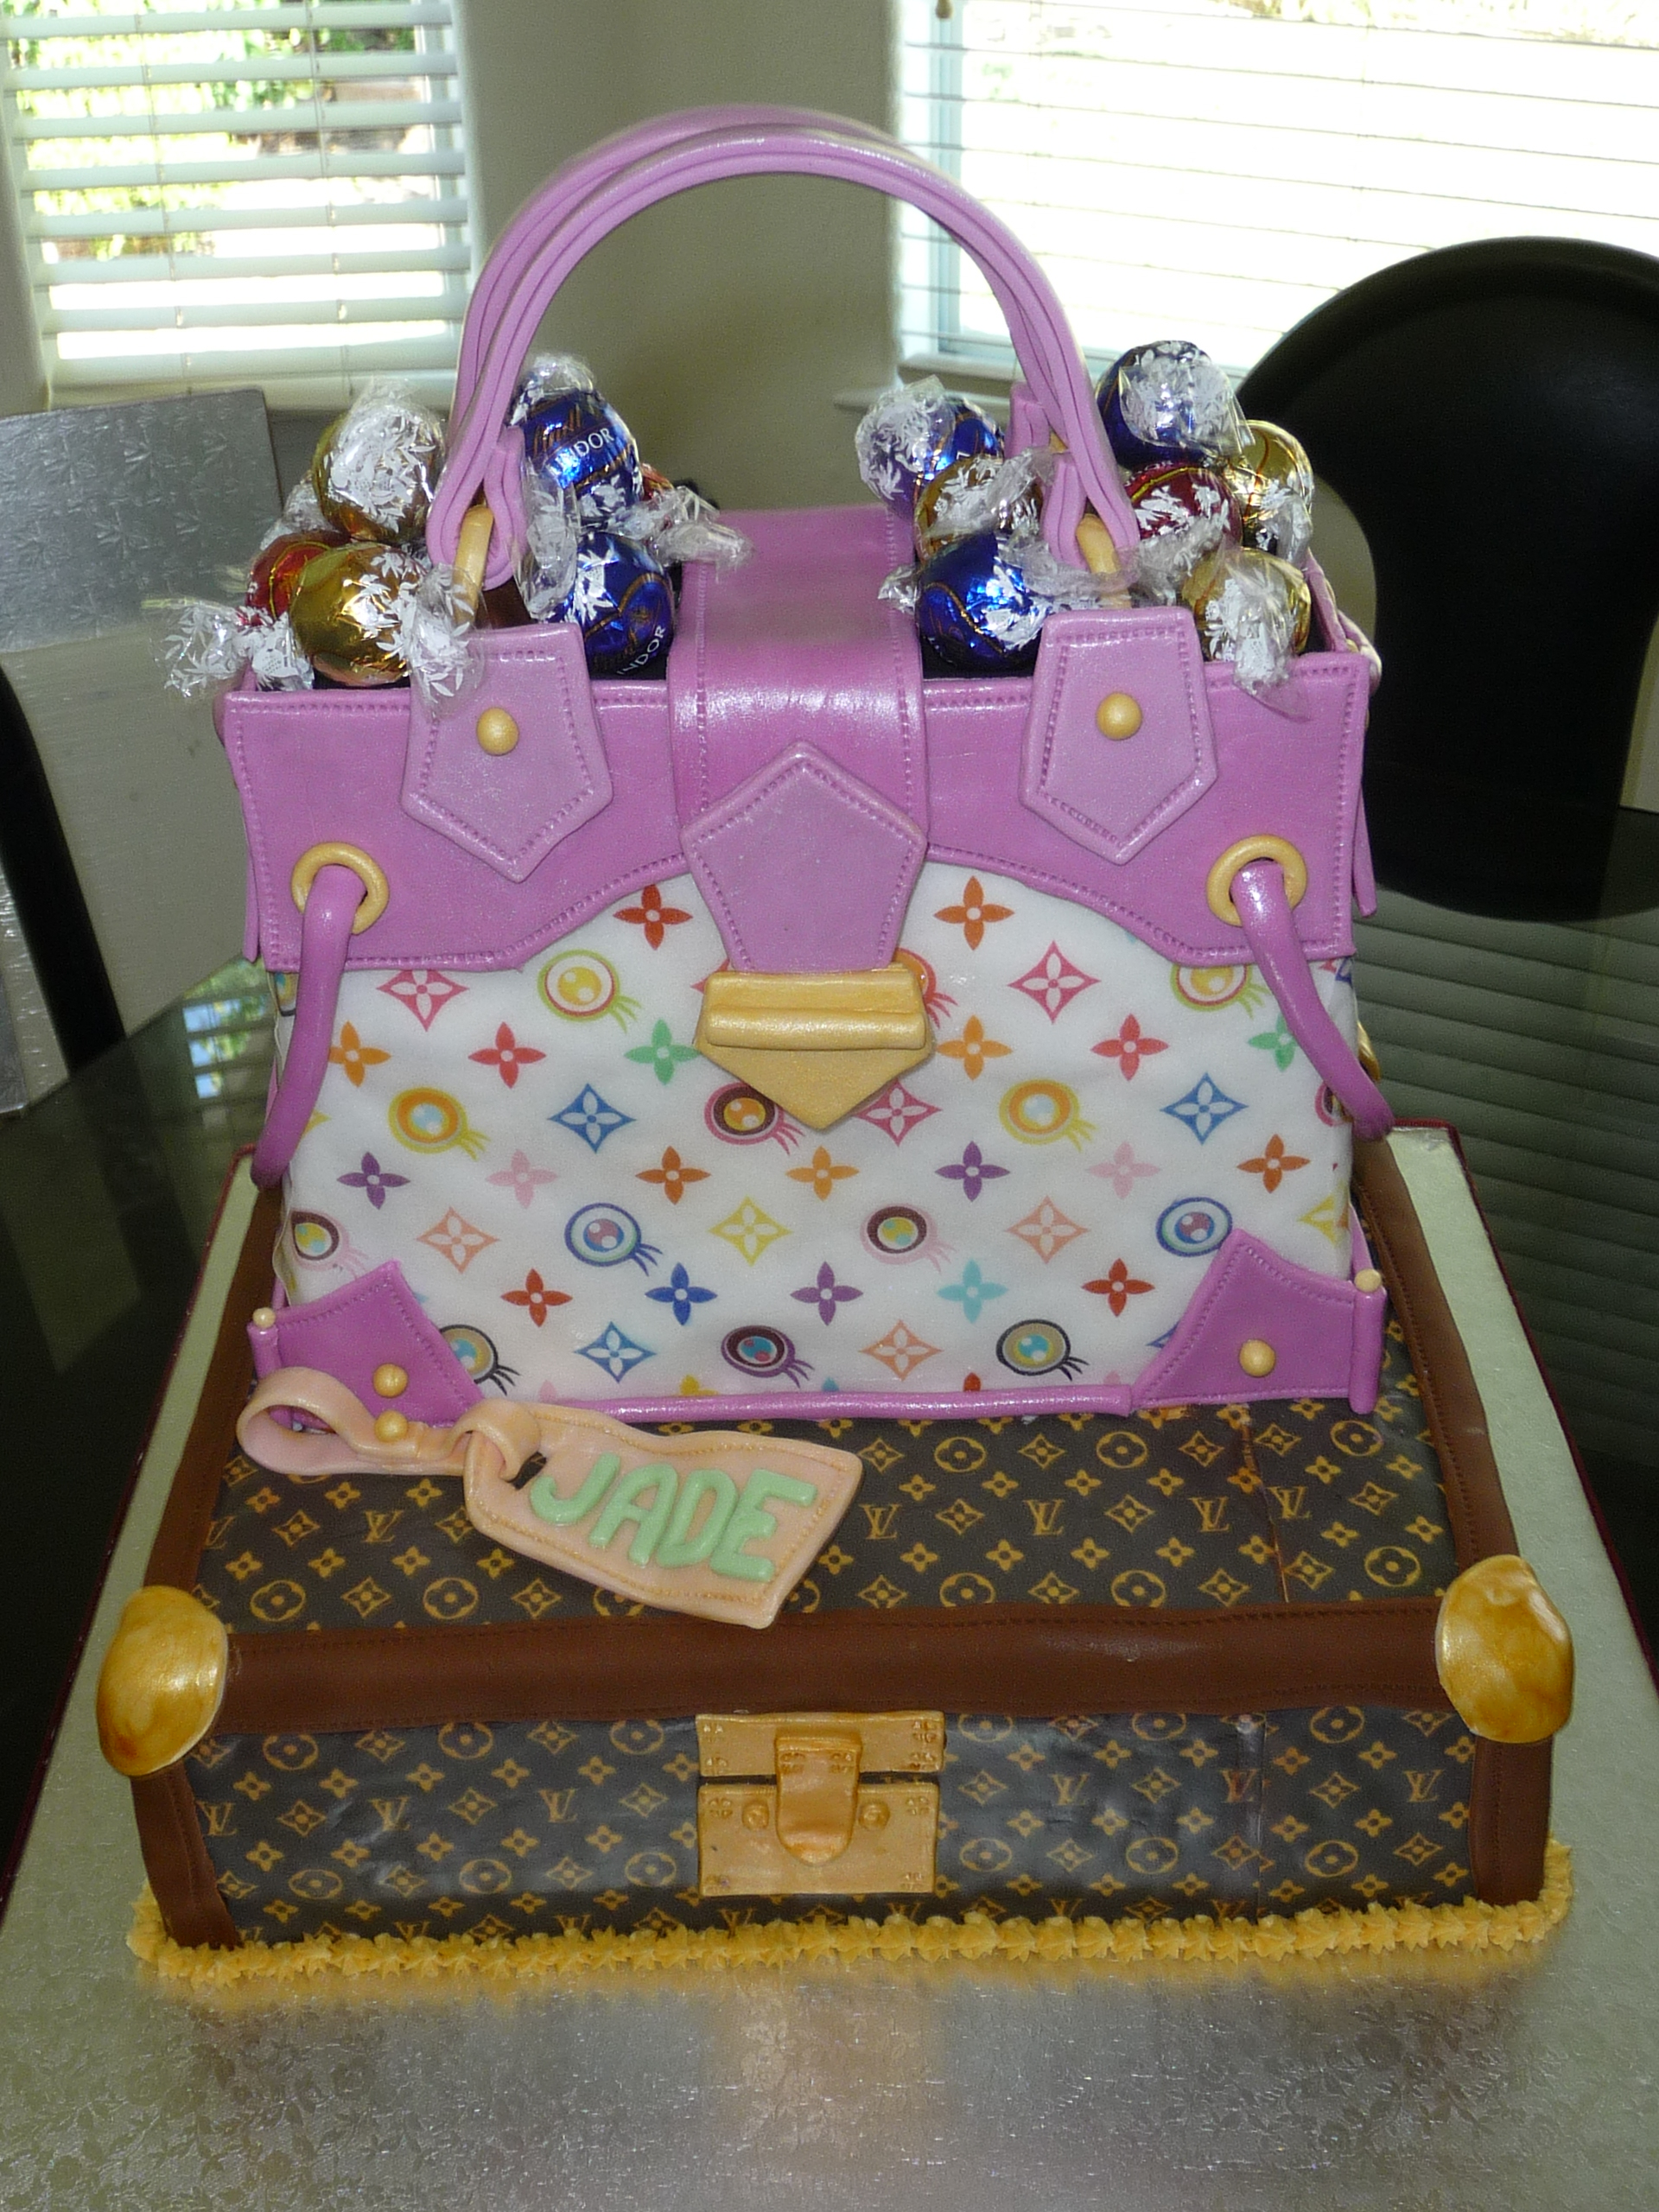 Louis Vuitton Transfer Sheets For Cakes | Confederated Tribes of the Umatilla Indian Reservation